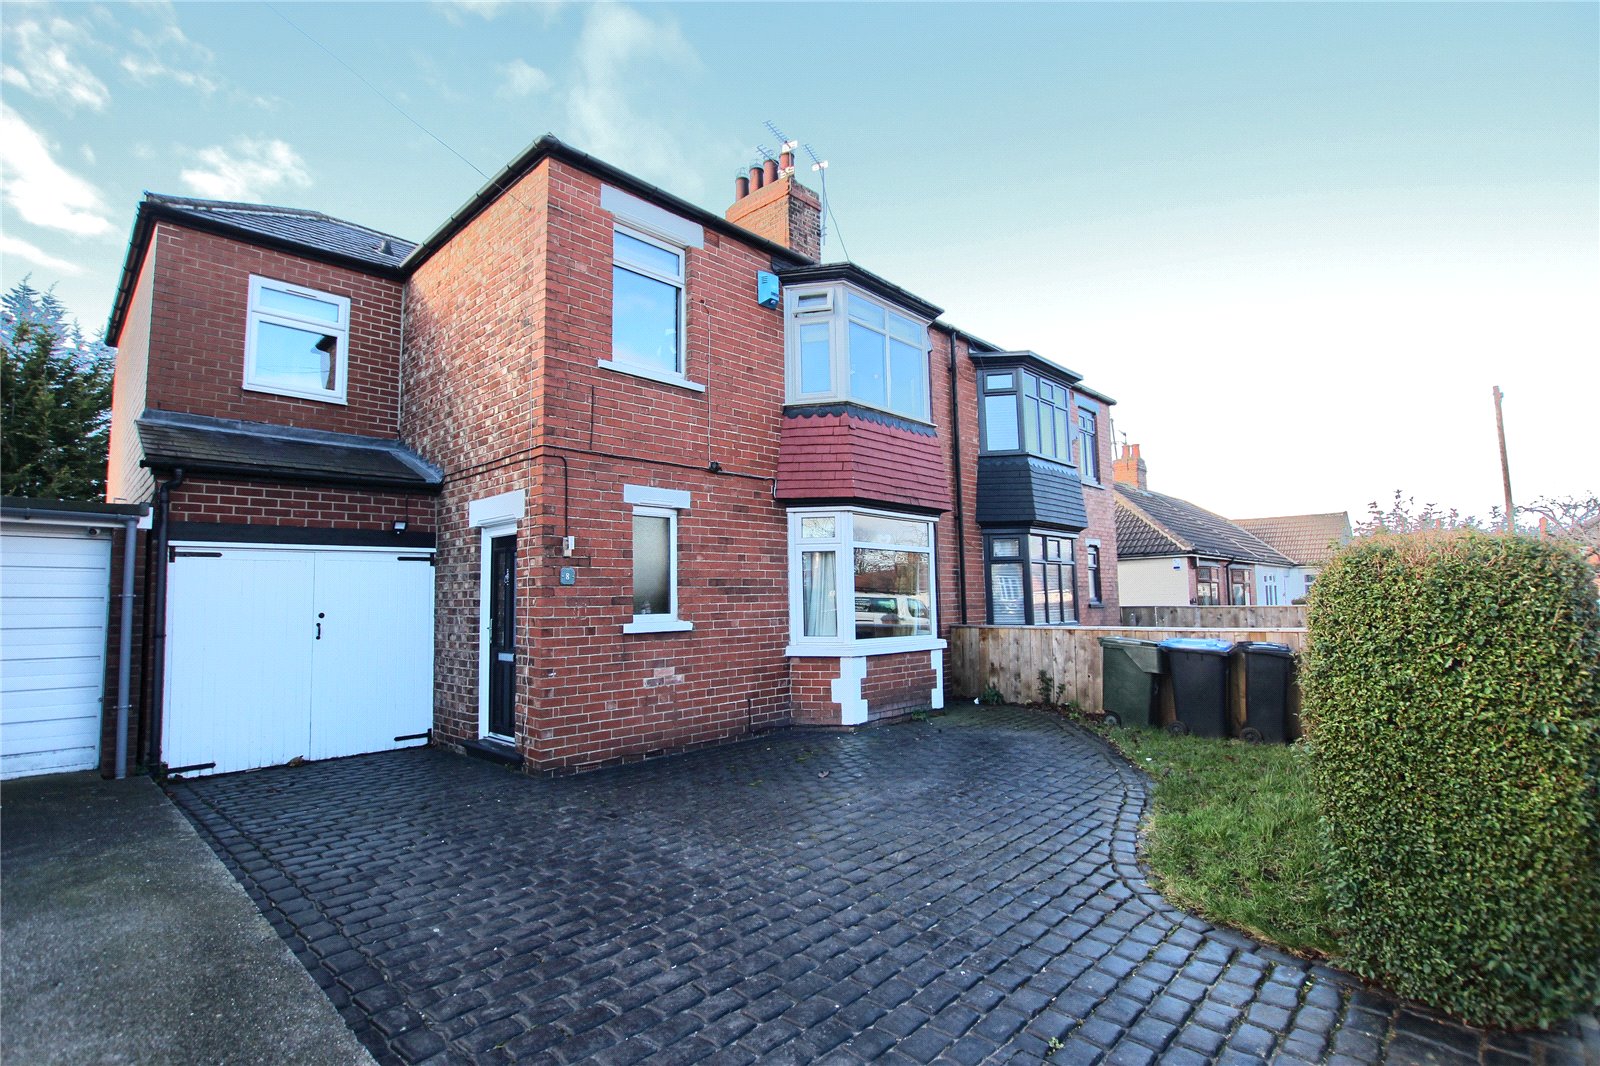 4 bed house for sale in Broadgate Road, Linthorpe 1